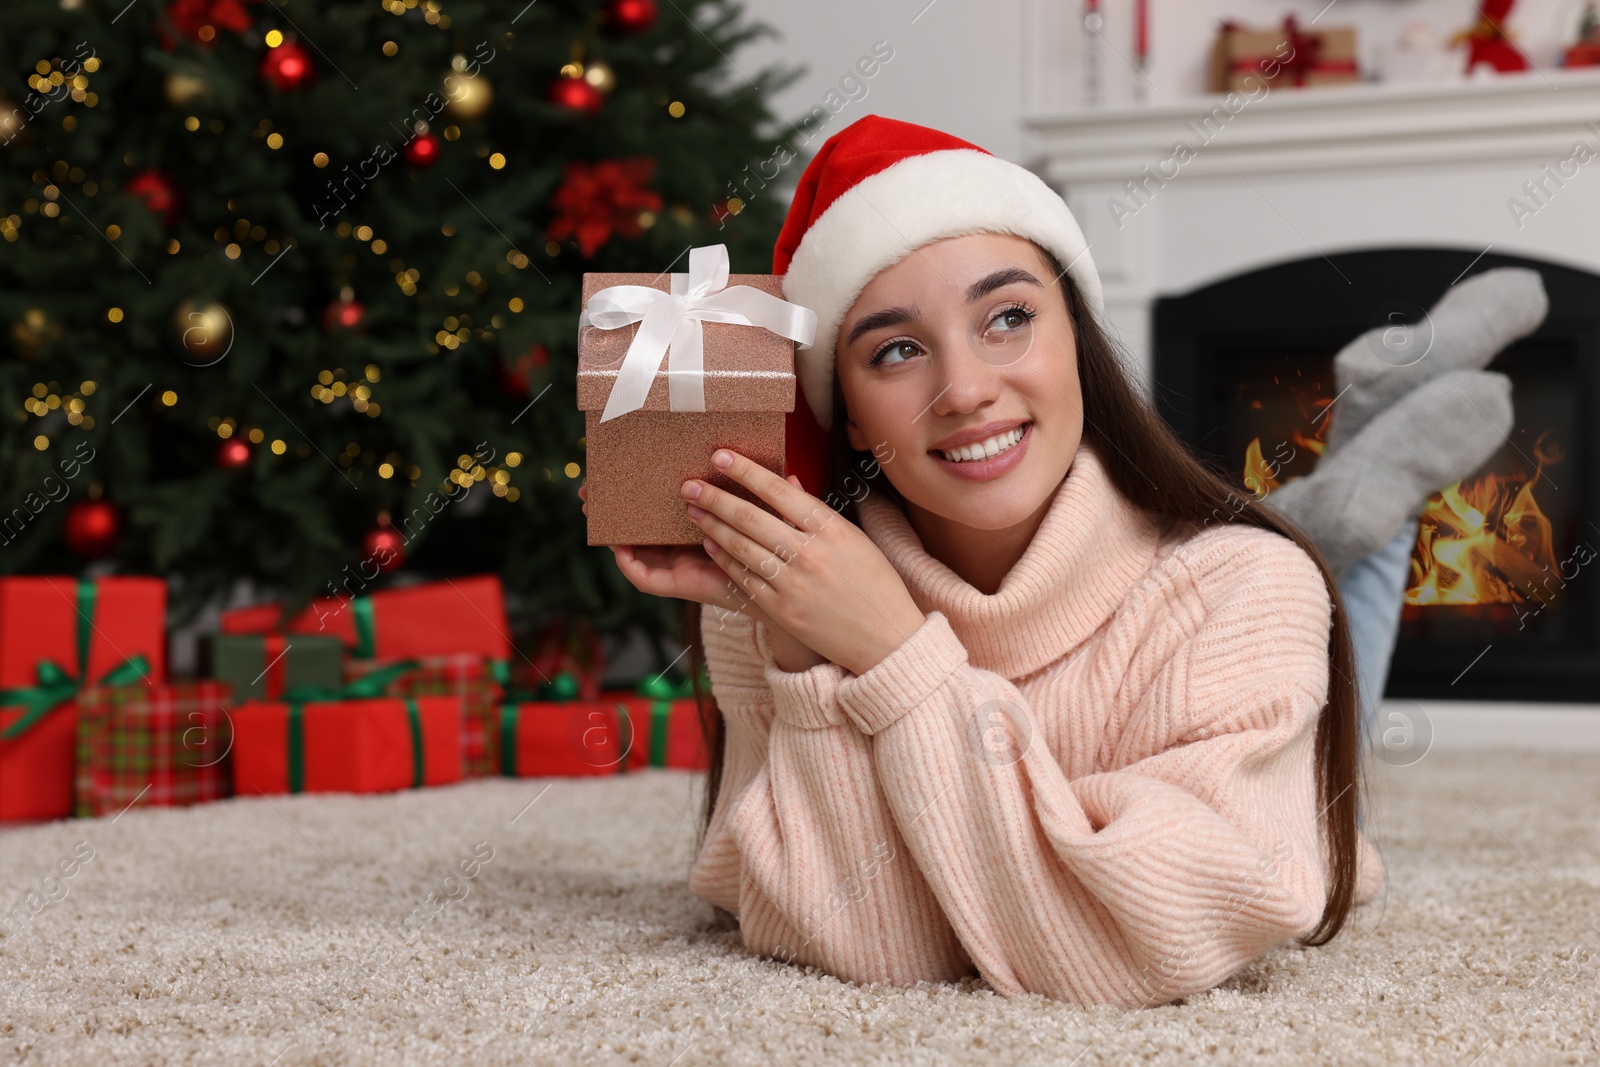 Photo of Happy young woman in Santa hat with gift box in room decorated for Christmas